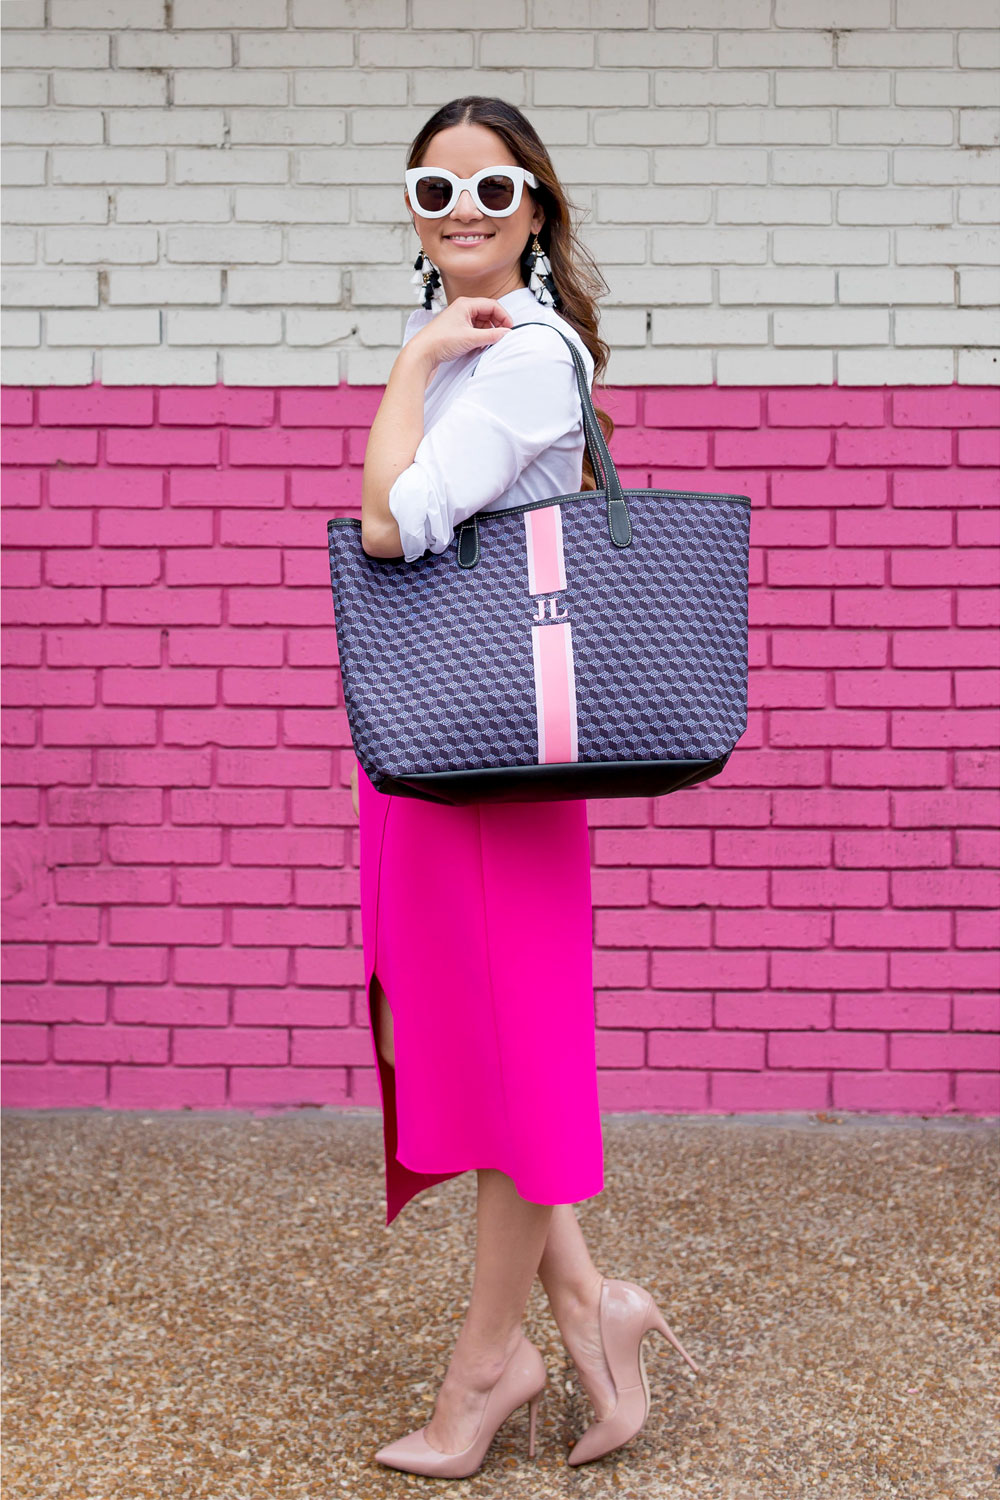 Barrington Gifts St Anne Tote Pink Monogram